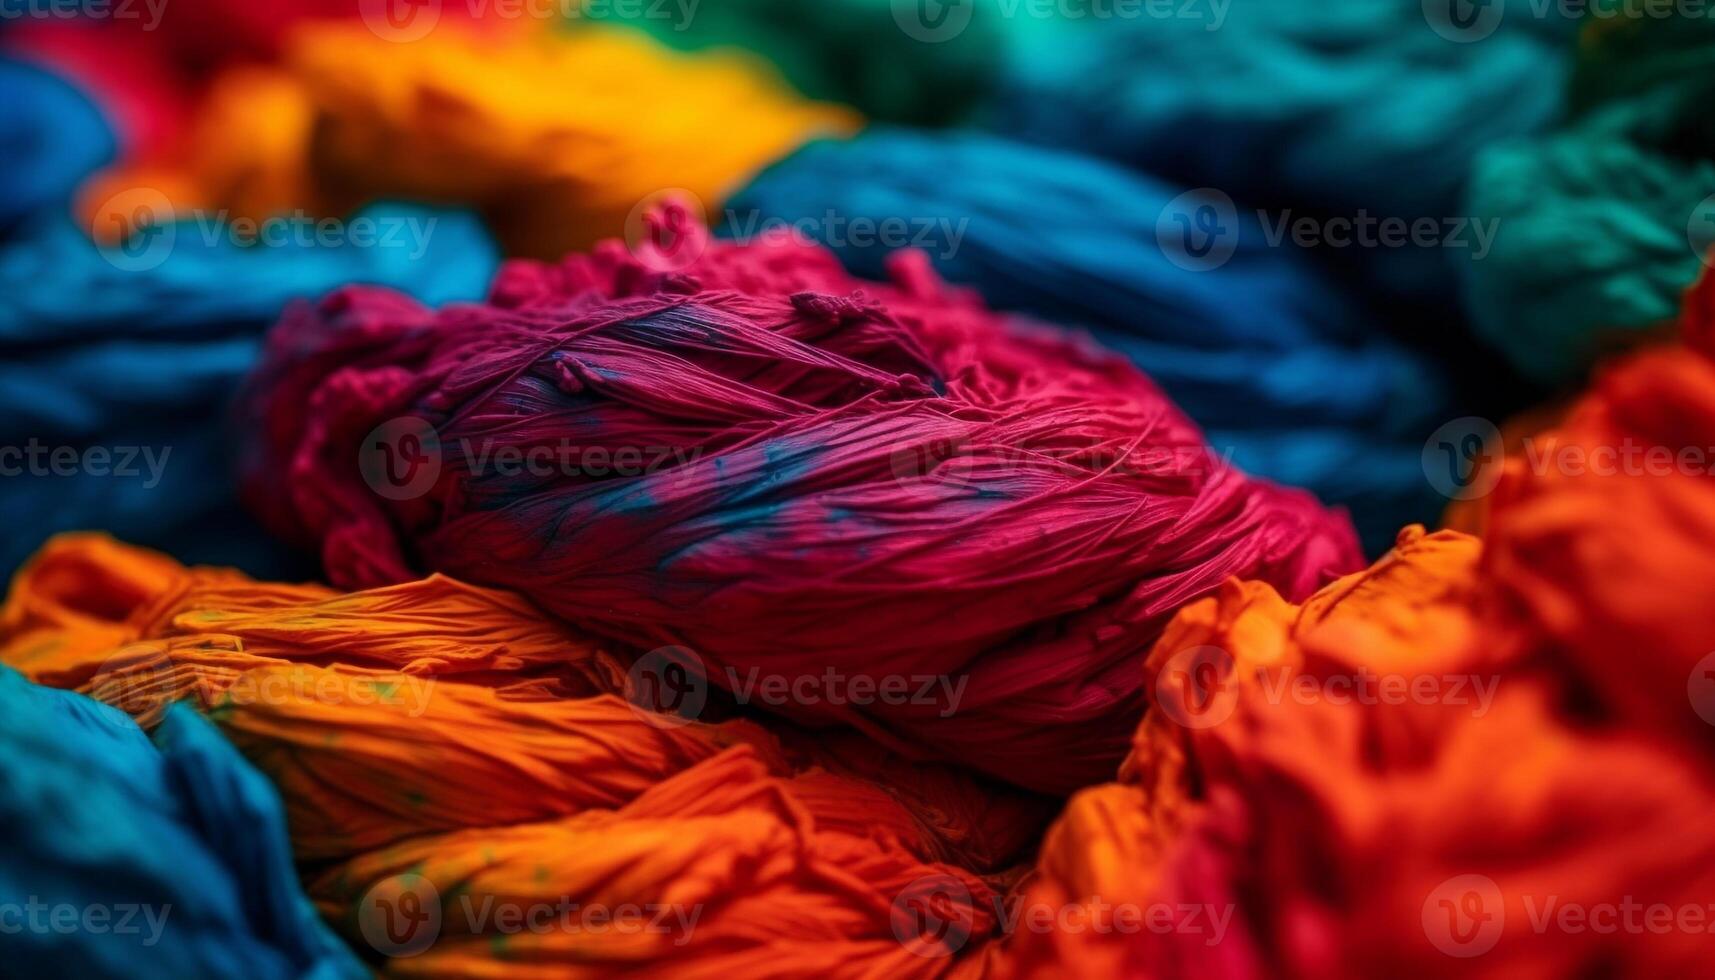 Vibrant colors of wool create abstract chaos in homemade decoration generated by AI photo